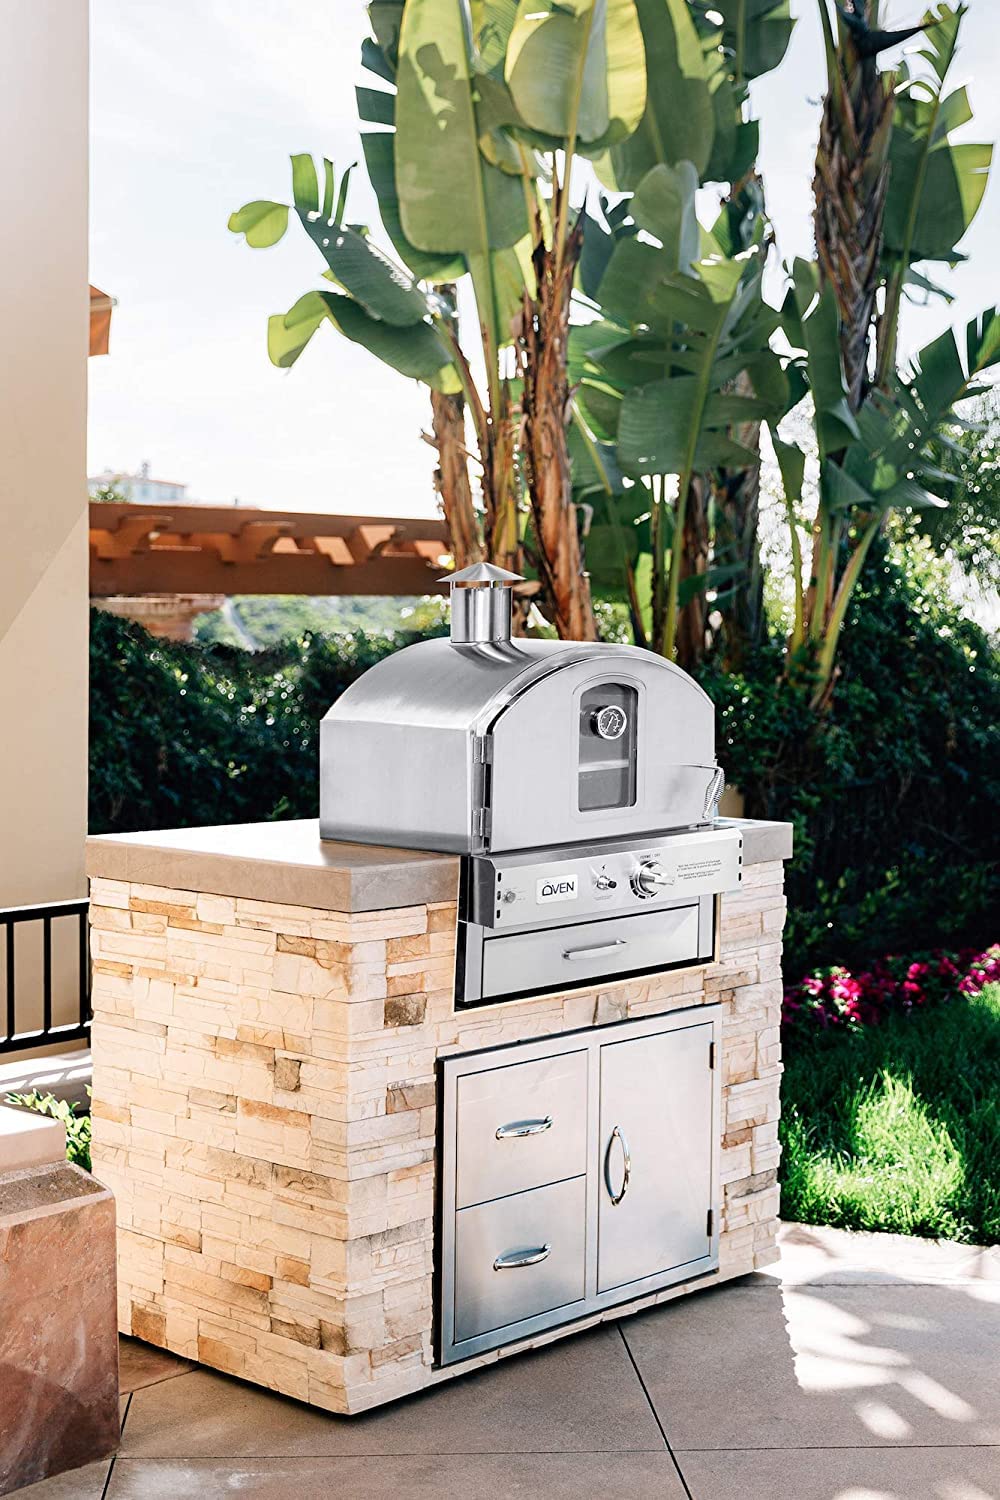 AMS Fireplace Summerset Pizza Oven - Large Capacity Natural Gas Outdoor Oven with Pizza Stone and Smoker Box, 304 Stainless Steel Construction for Built-in or Countertop Use. FREE Tabletop Fire Pit